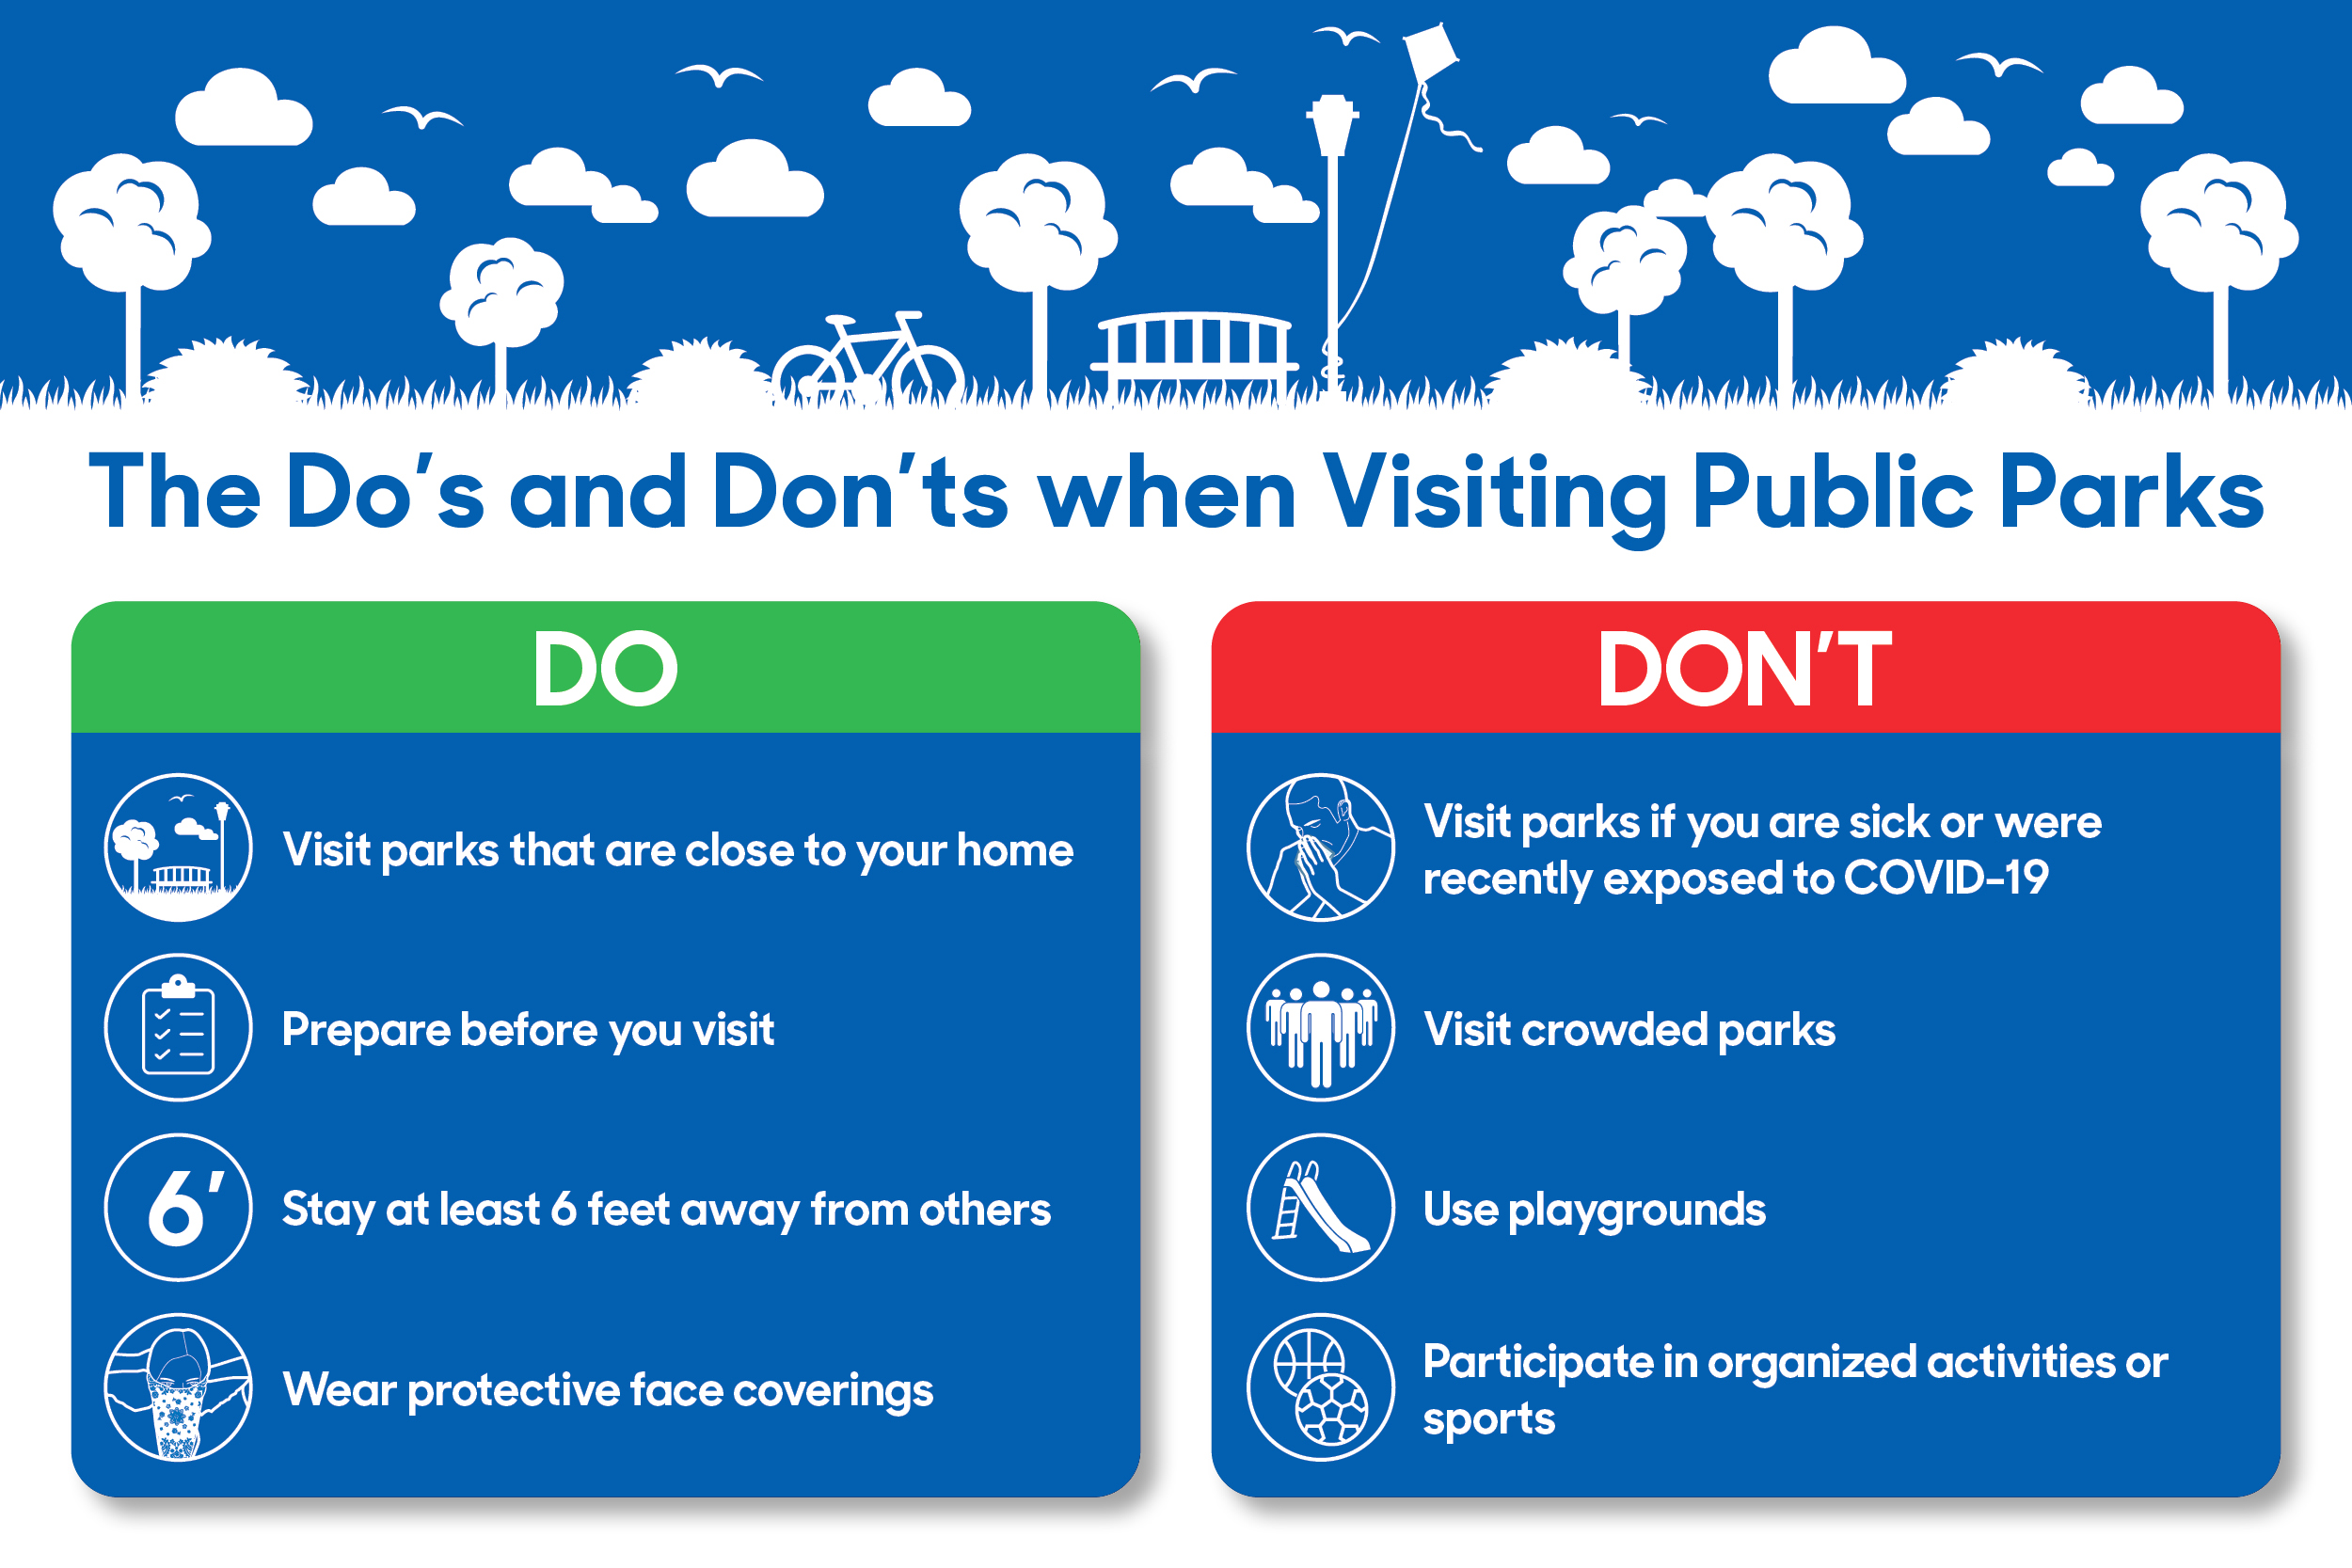 The Do's and Don'ts when Visiting Public Parks